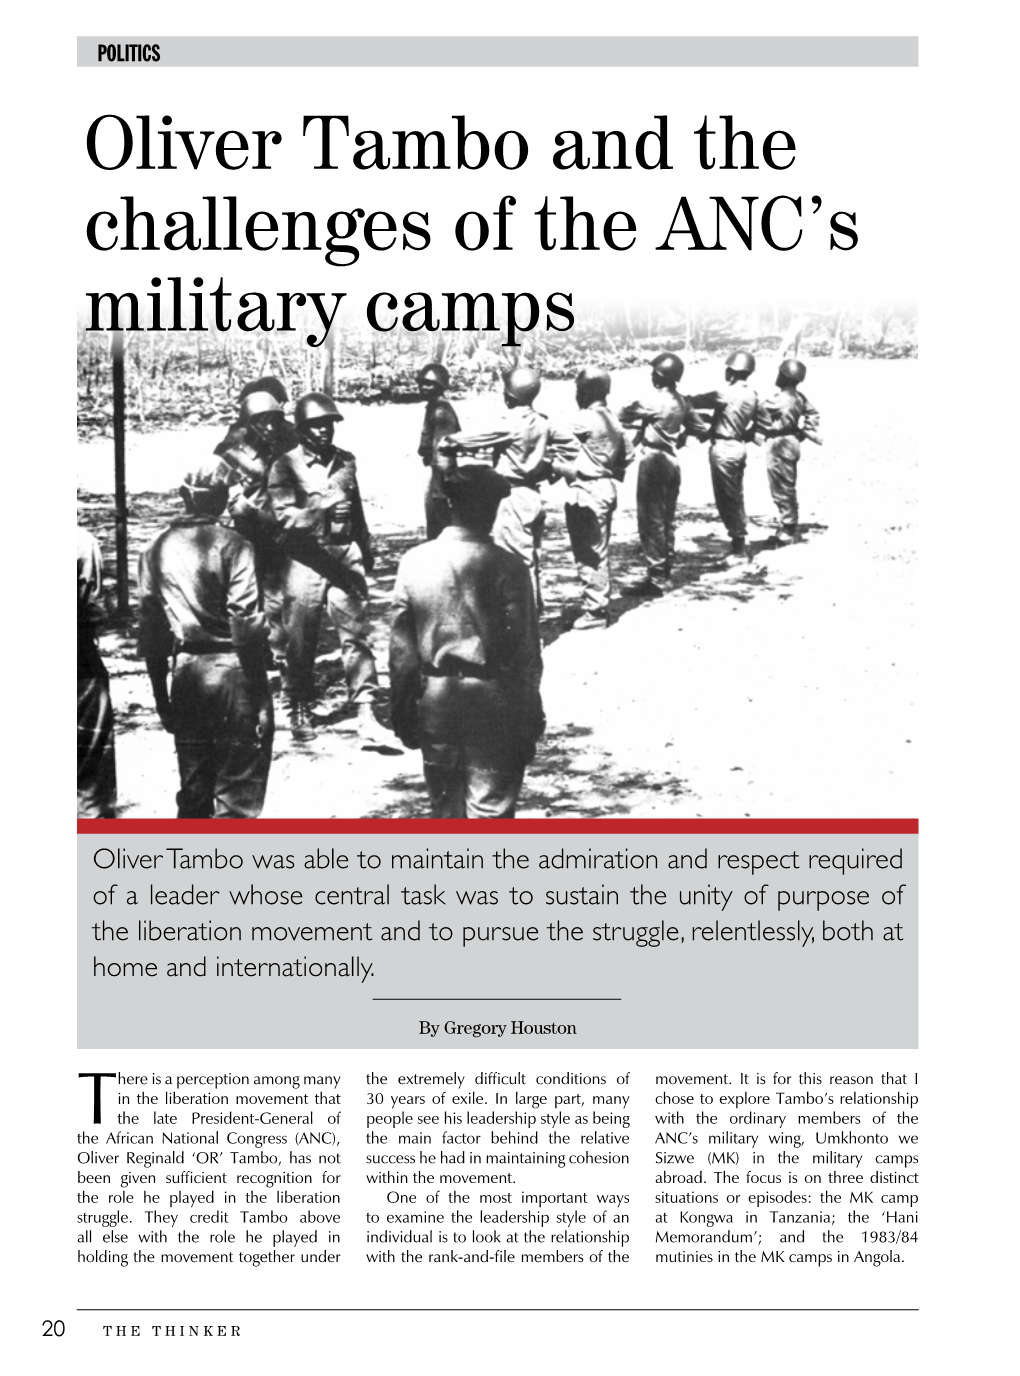 Oliver Tambo and the Challenges of the ANC's Military Camps